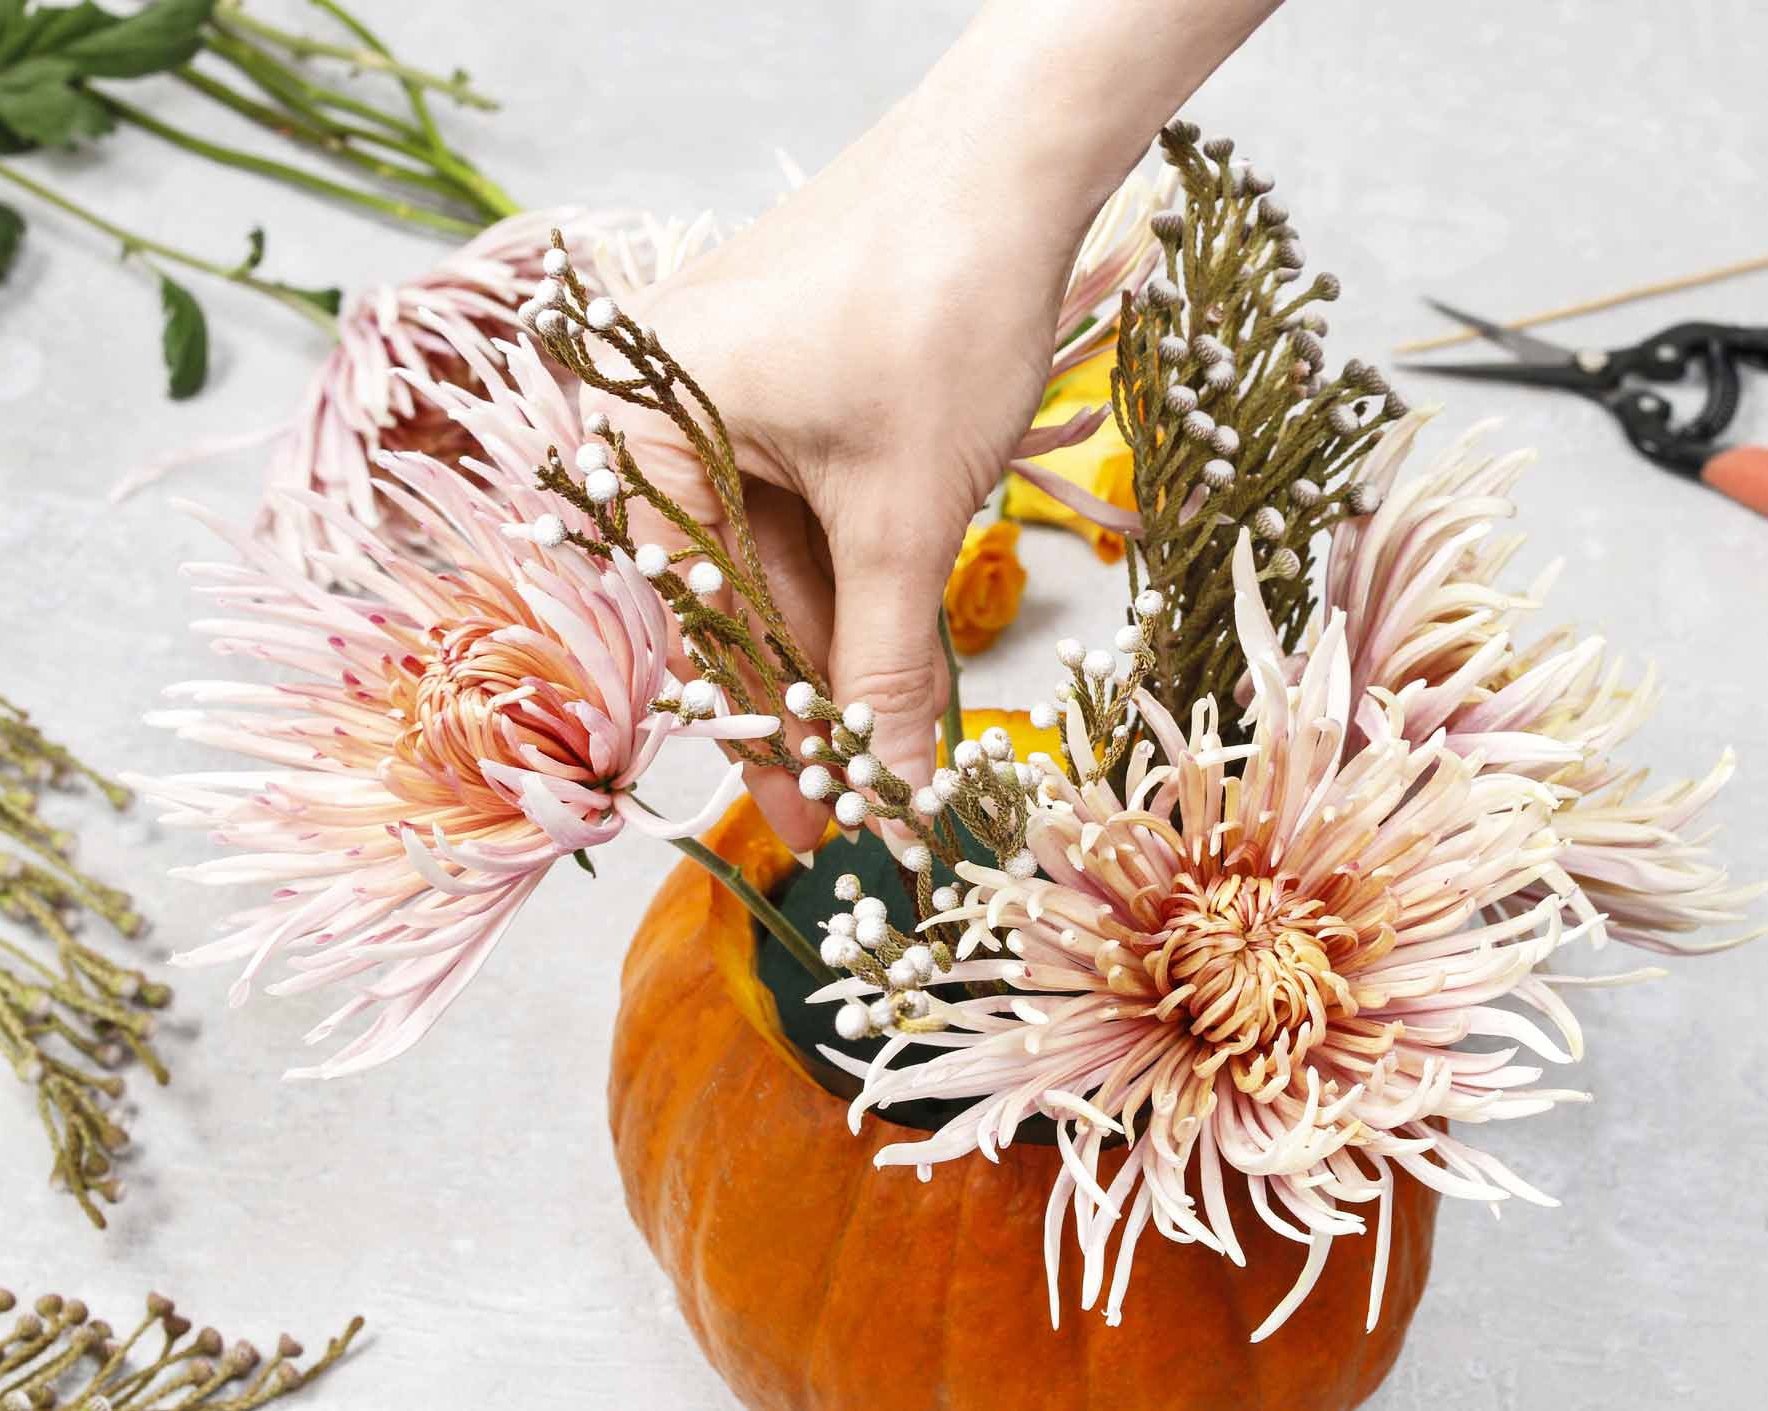 Real pumpkin hollowed out and hands placing fresh flowers inside.